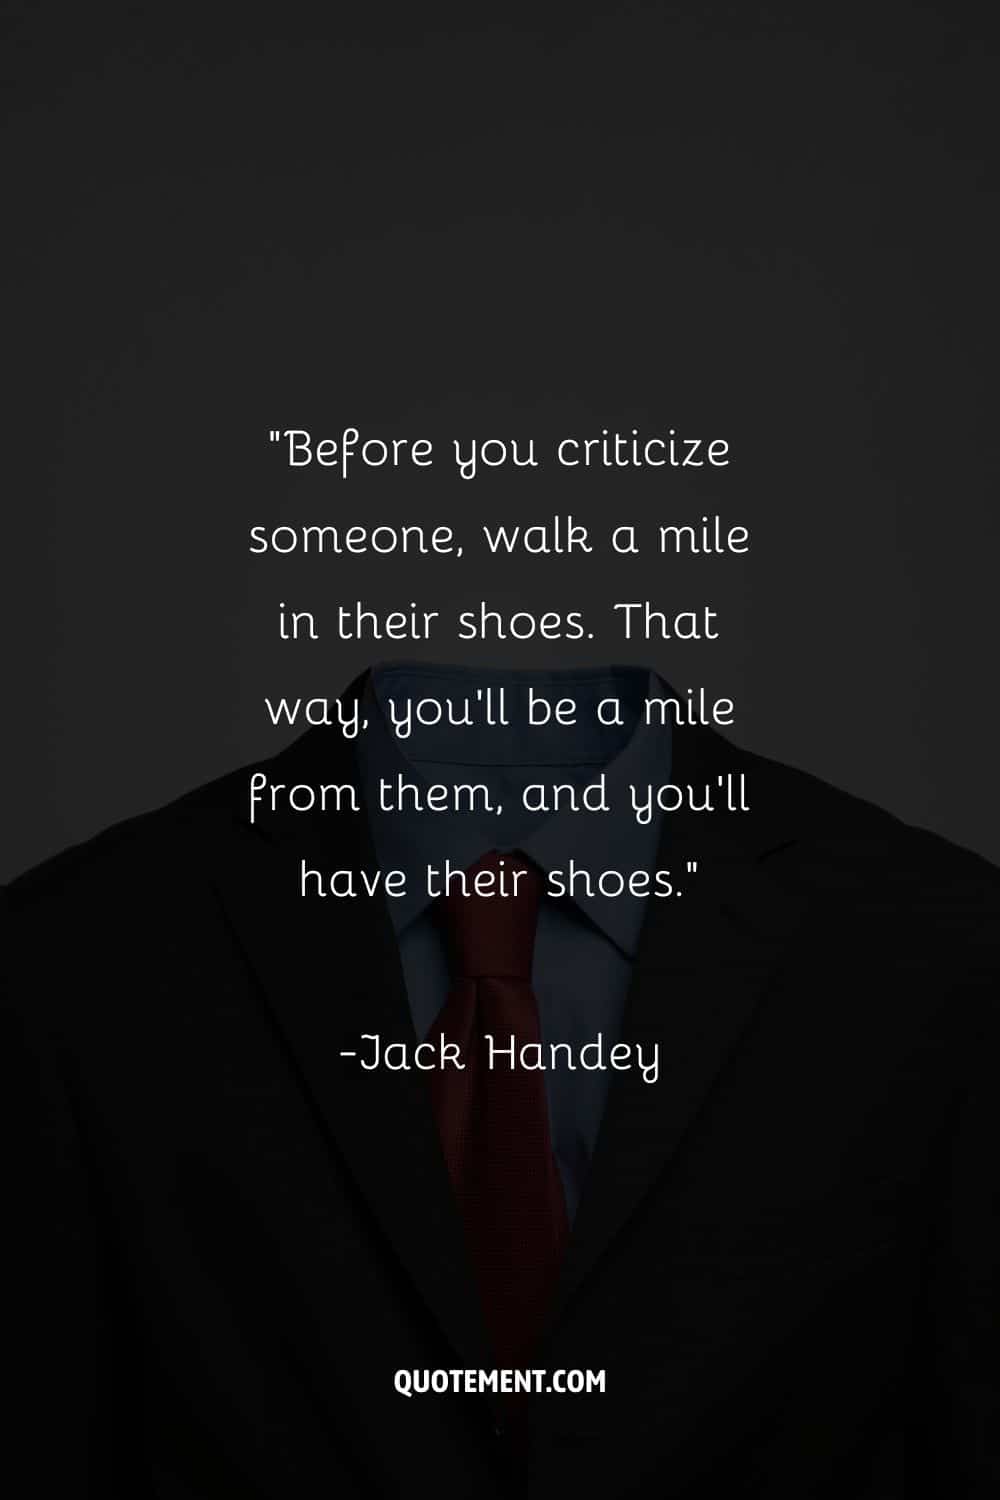 “Before you criticize someone, walk a mile in their shoes. That way, you’ll be a mile from them, and you’ll have their shoes.”